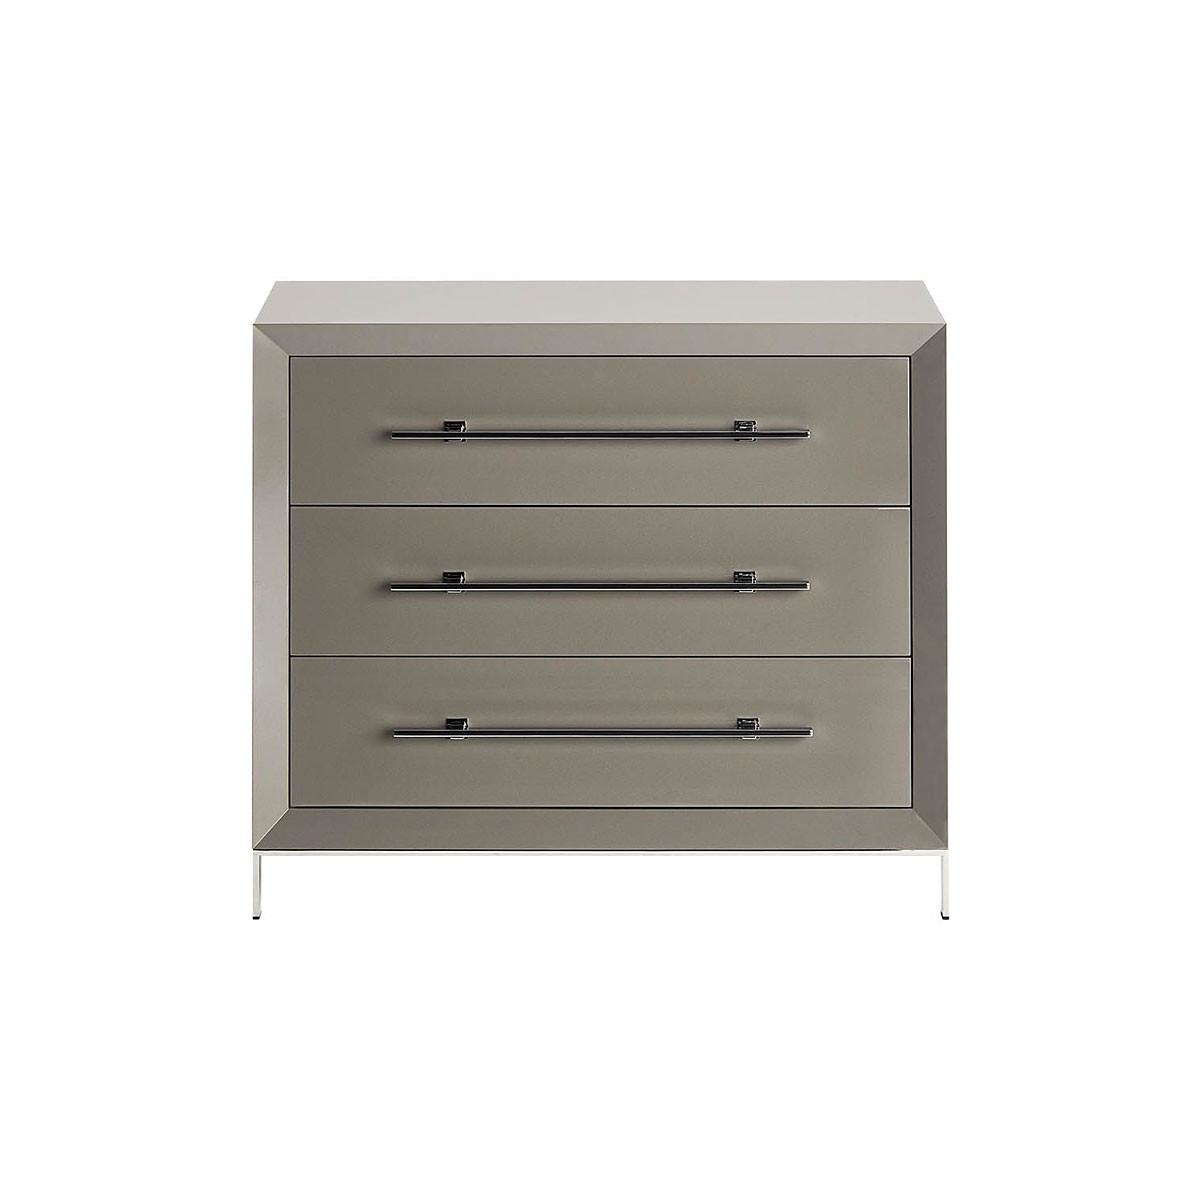 The Magna Chest of Drawers